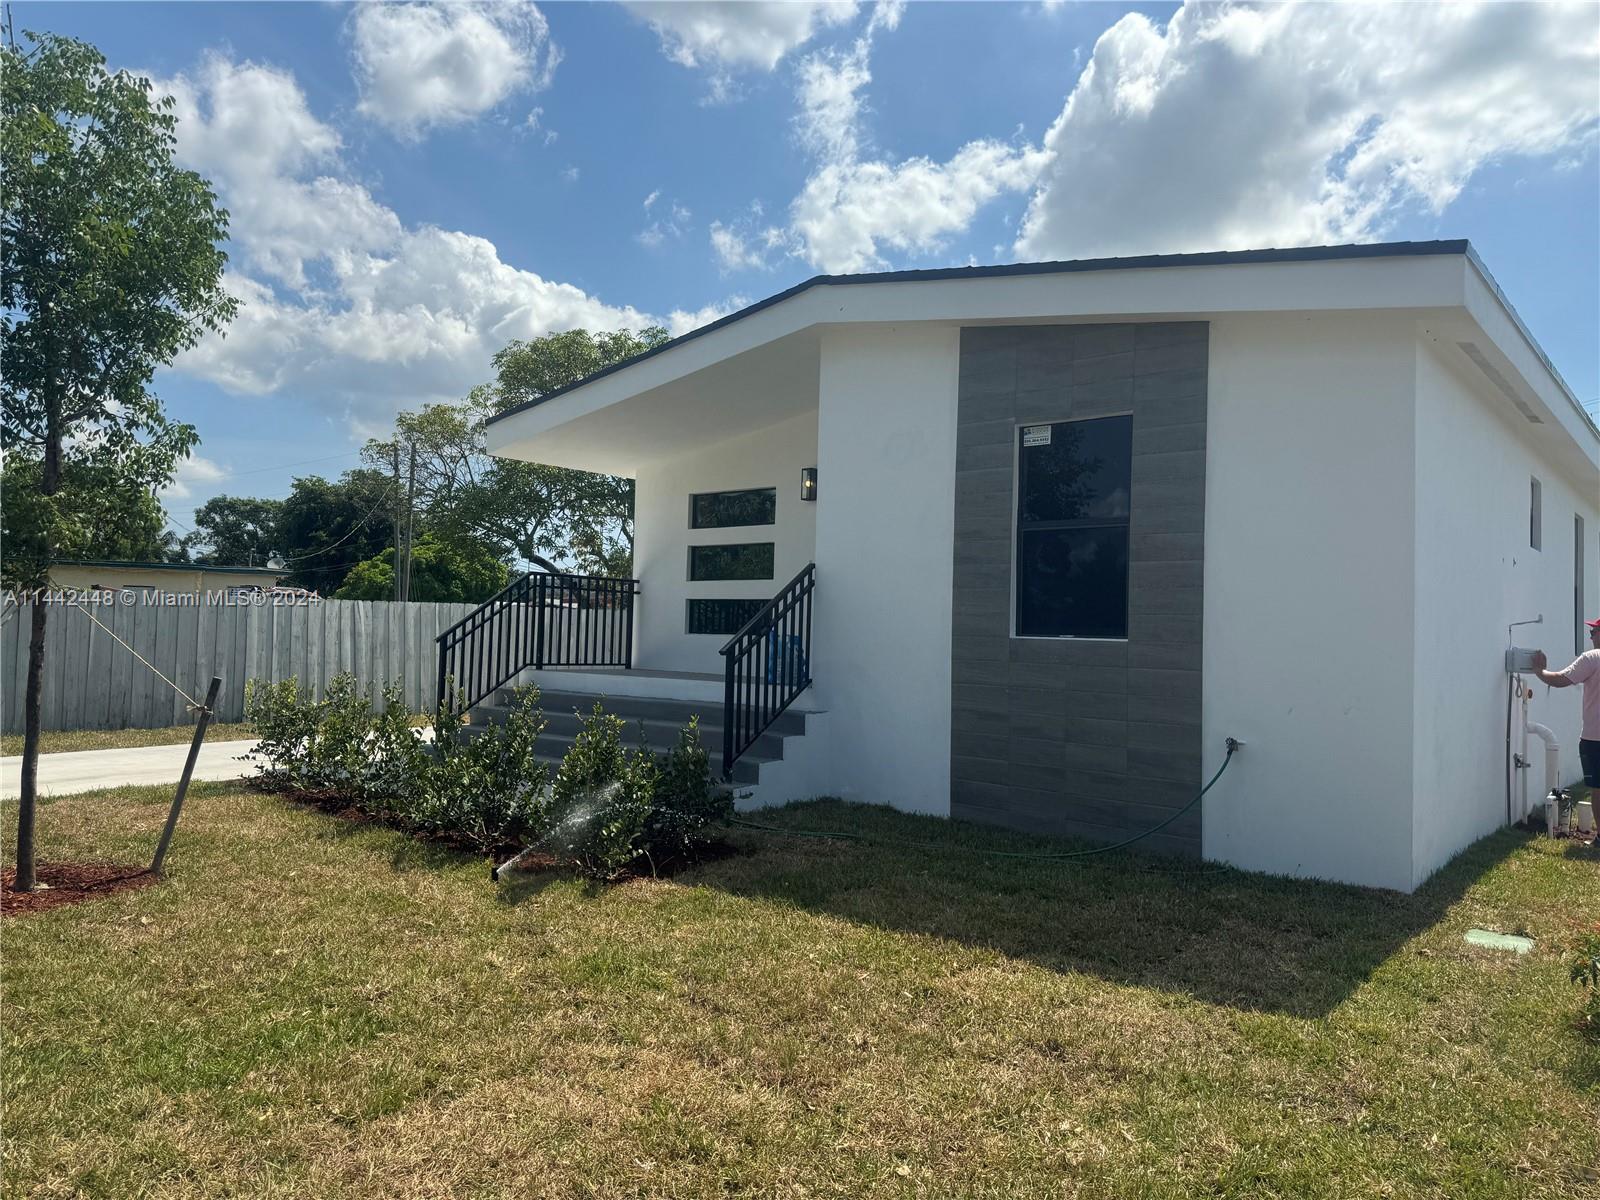 412 Nw 15th Ave, Pompano Beach, Florida 33069, 3 Bedrooms Bedrooms, ,2 BathroomsBathrooms,Residential,For Sale,412 Nw 15th Ave,A11442448